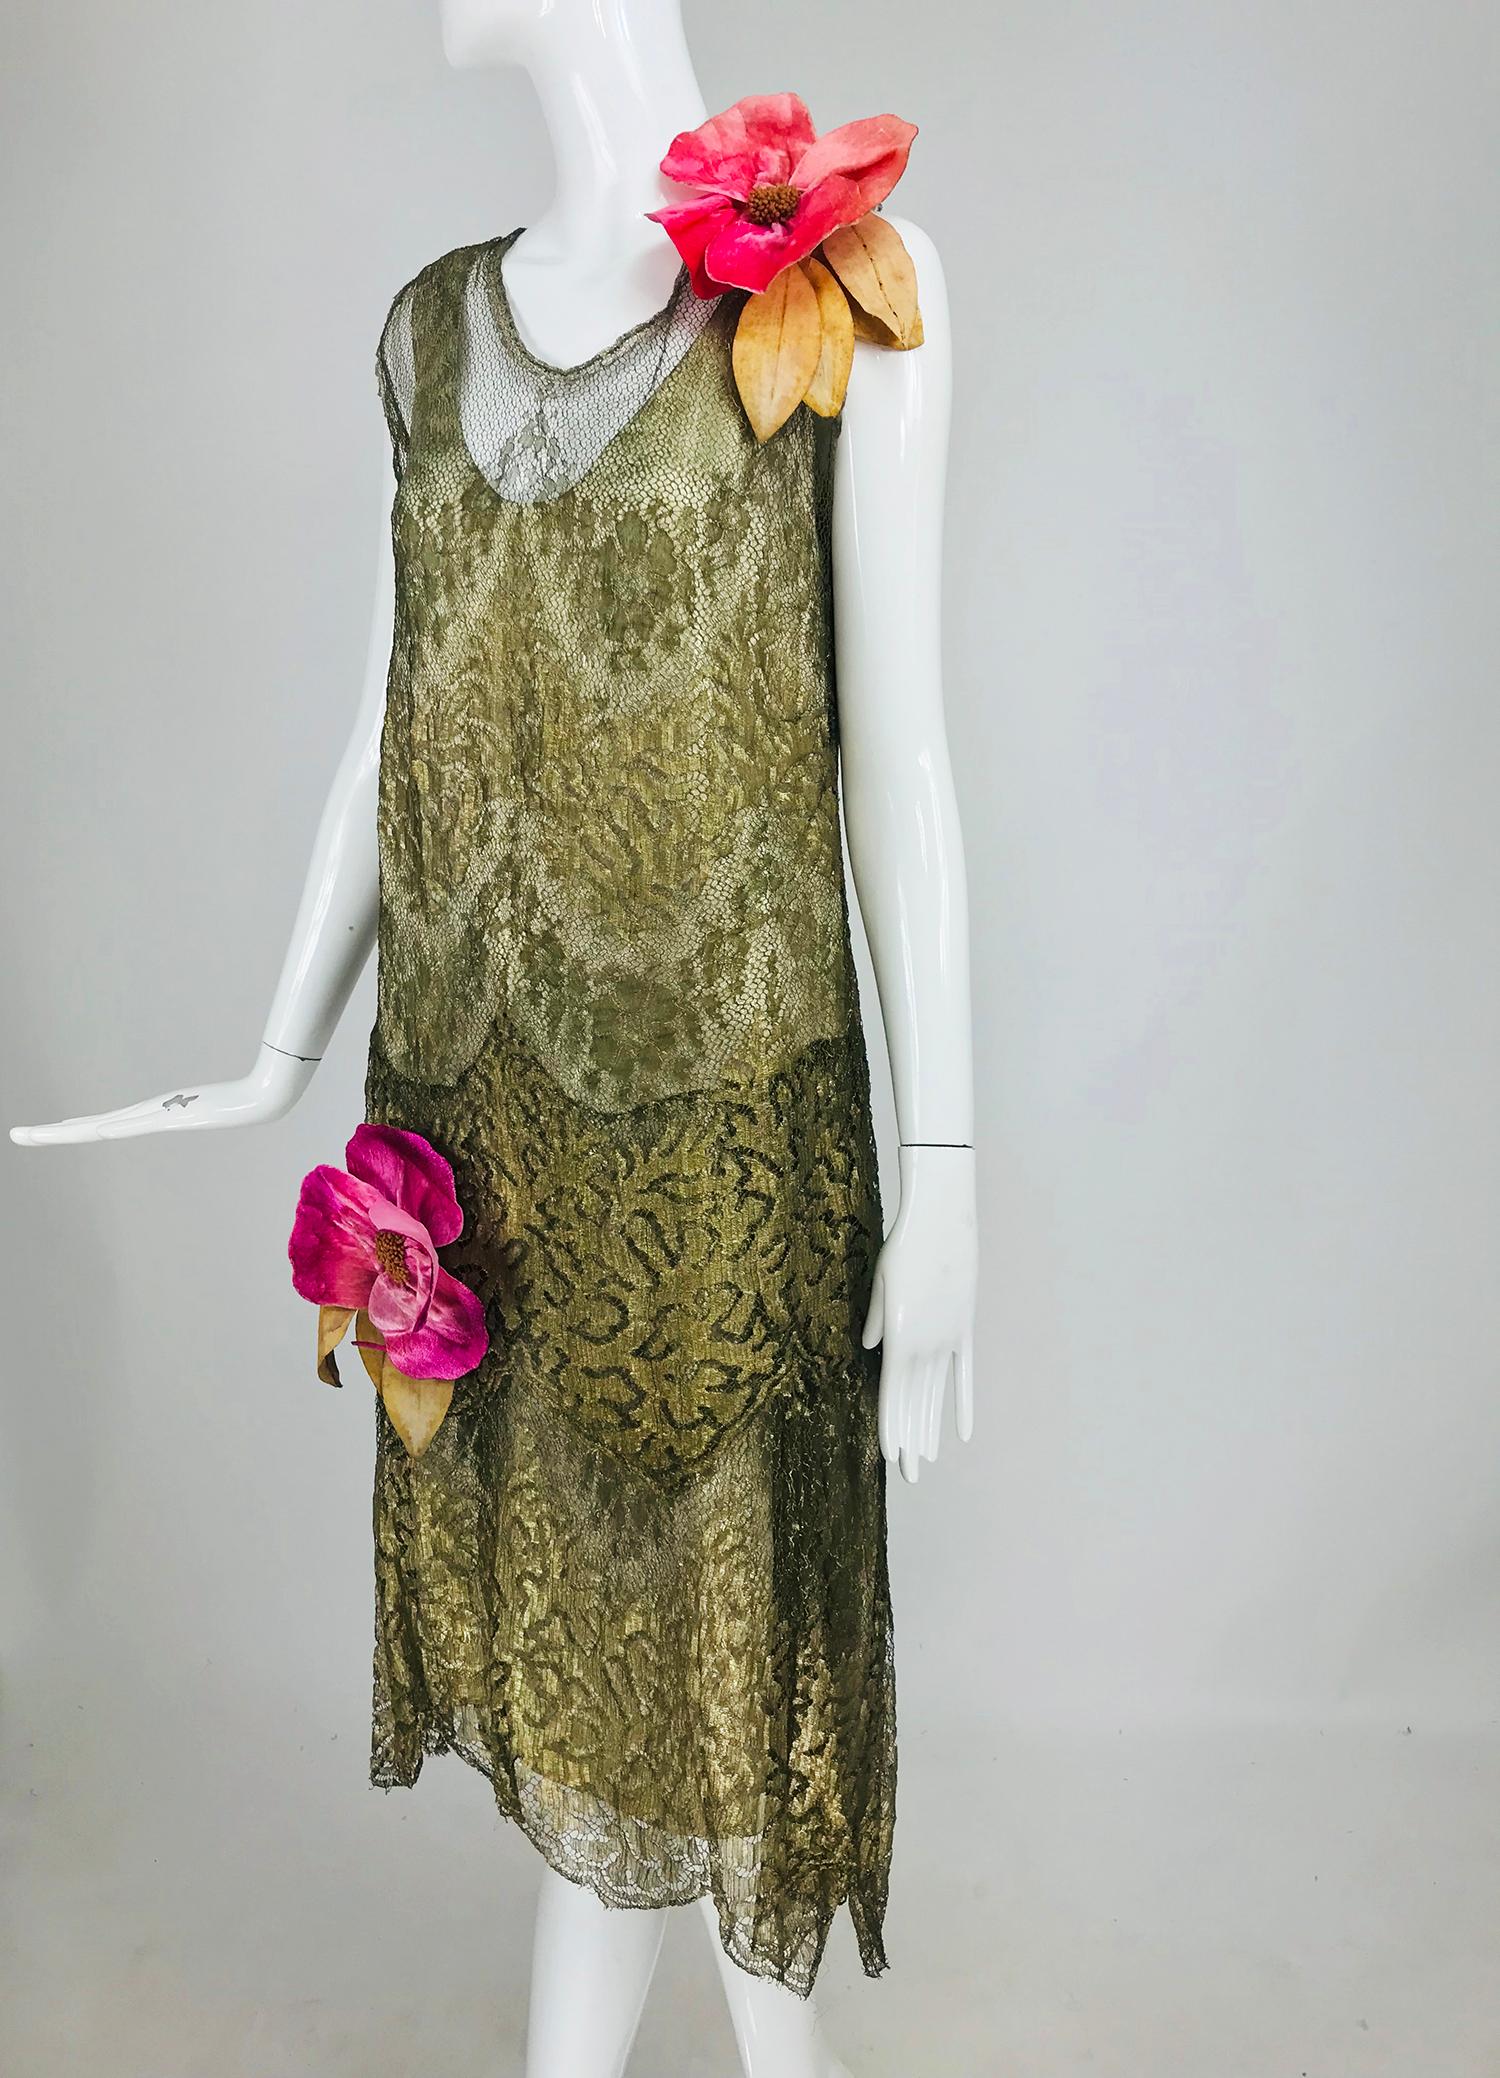 1920s gold metallic lace flapper dress vintage. This fabulous dress is such a wonderful example of the extravagance that was the the 20s. The gold of this lace is weighty and glitters in the light. The bodice has a round neckline that is edged in